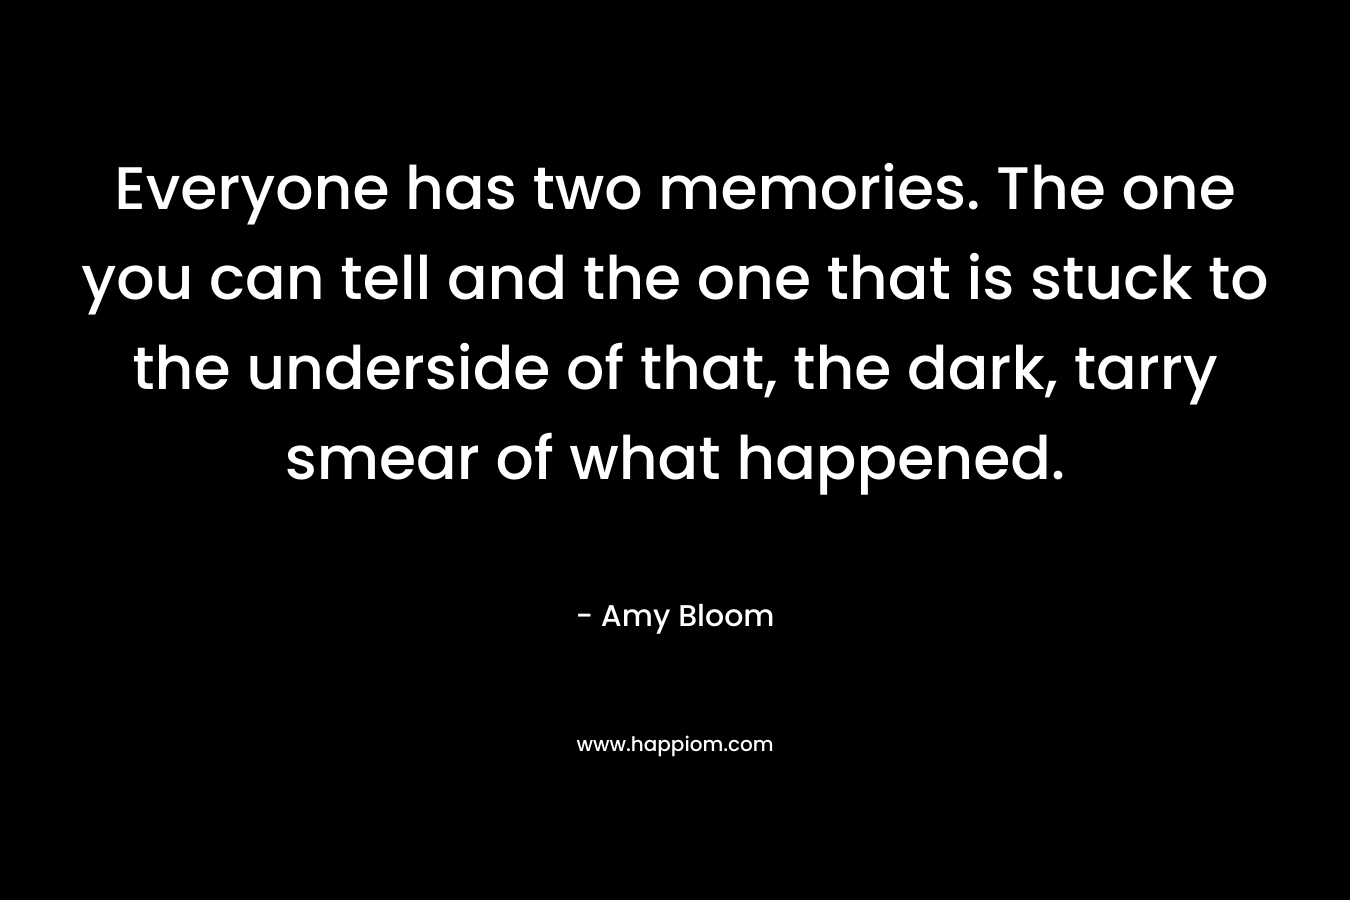 Everyone has two memories. The one you can tell and the one that is stuck to the underside of that, the dark, tarry smear of what happened. – Amy Bloom